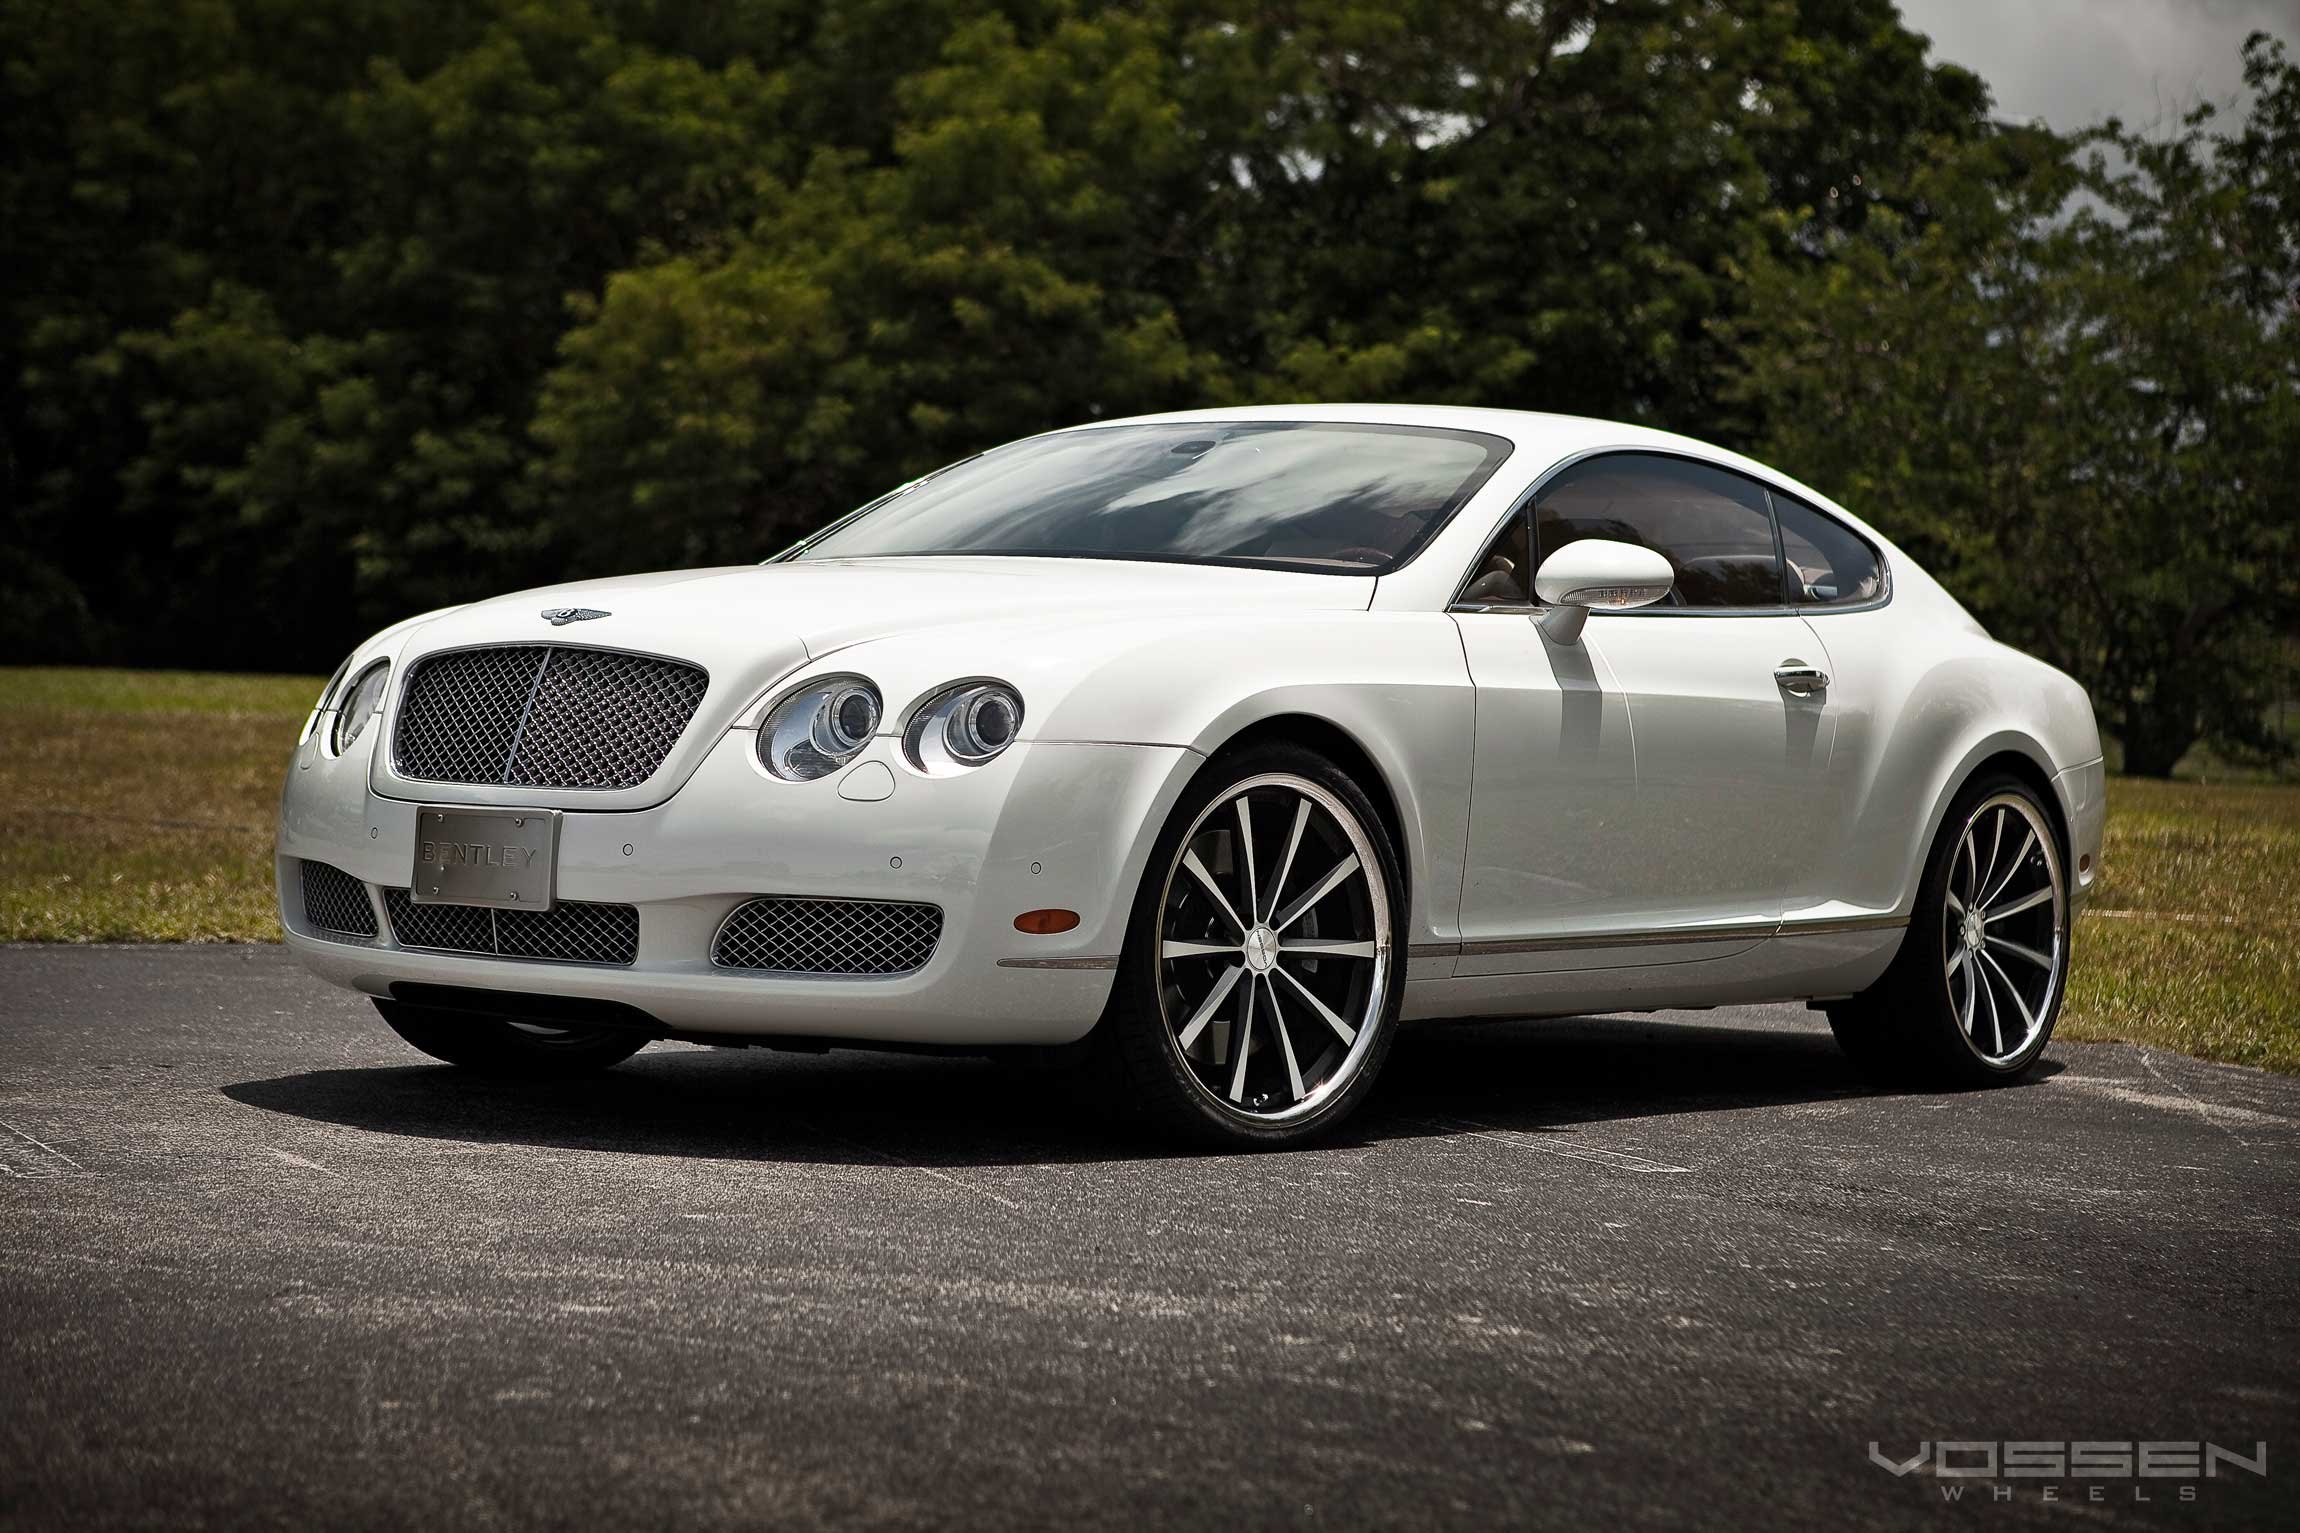 Bentley Continental with Chrome Bodyside Moldings - Photo by Vossen